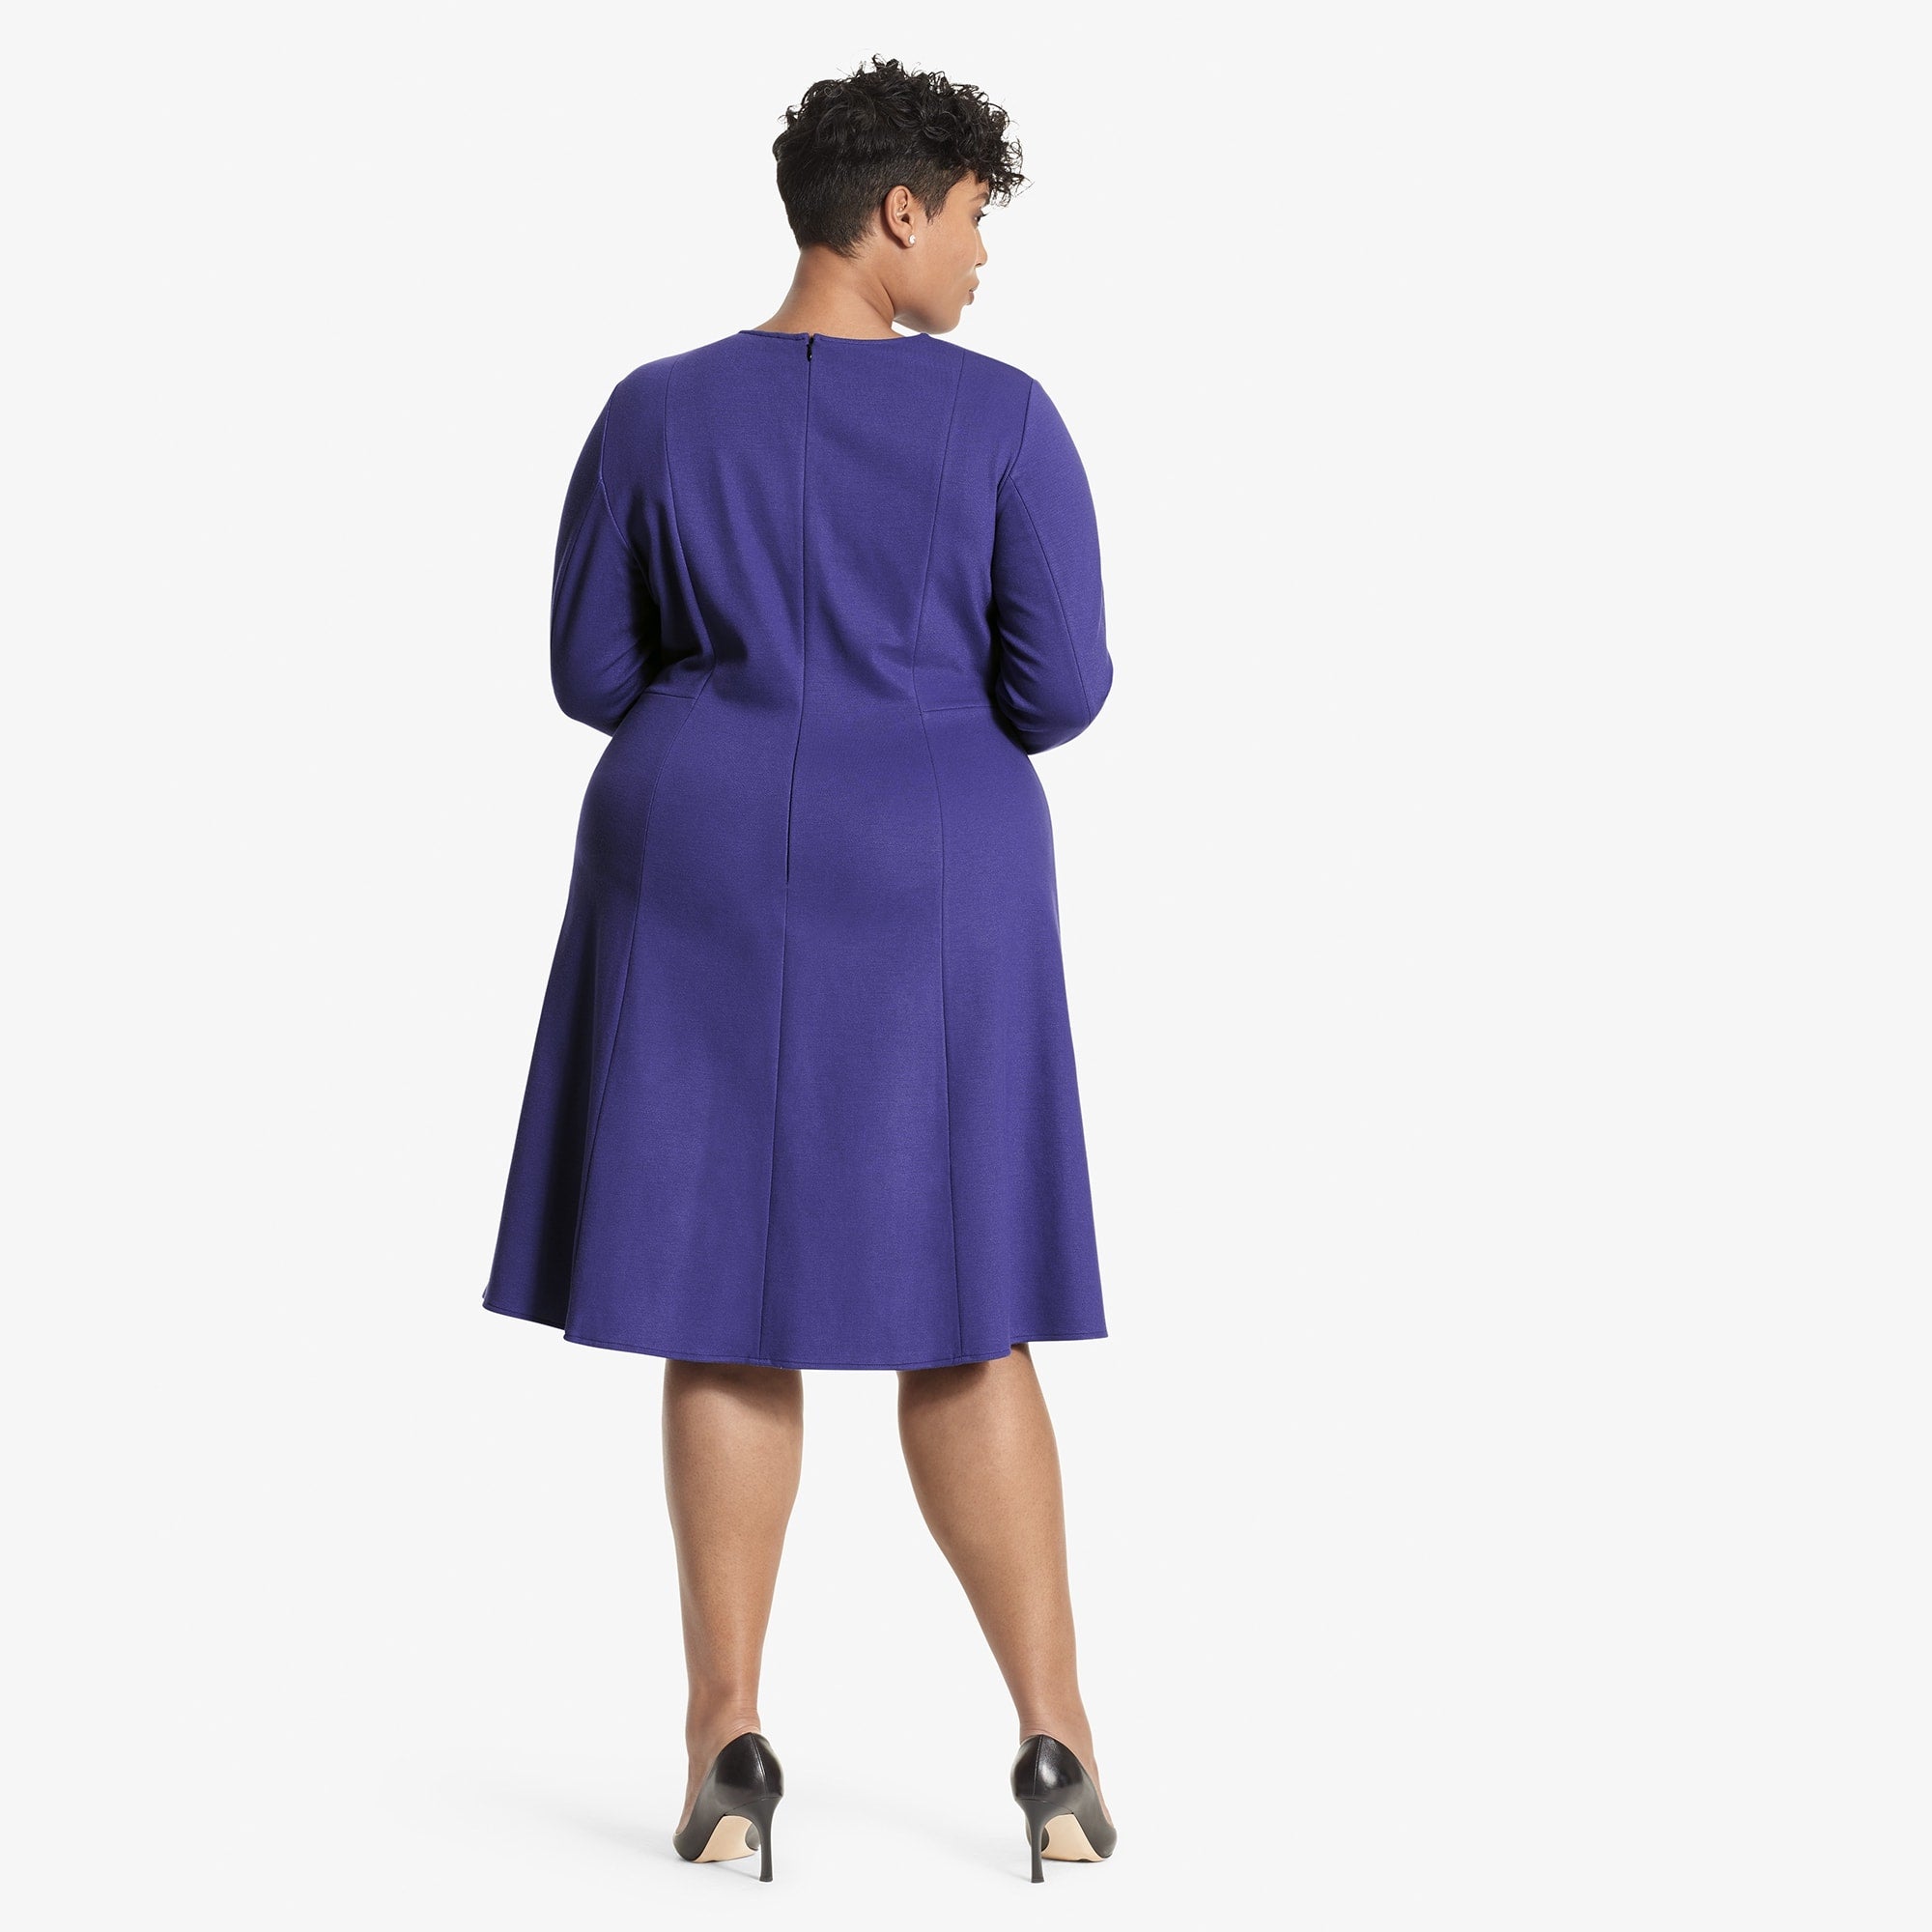 Back image of a woman standing wearing the Ellis dress textured ponte in Violet